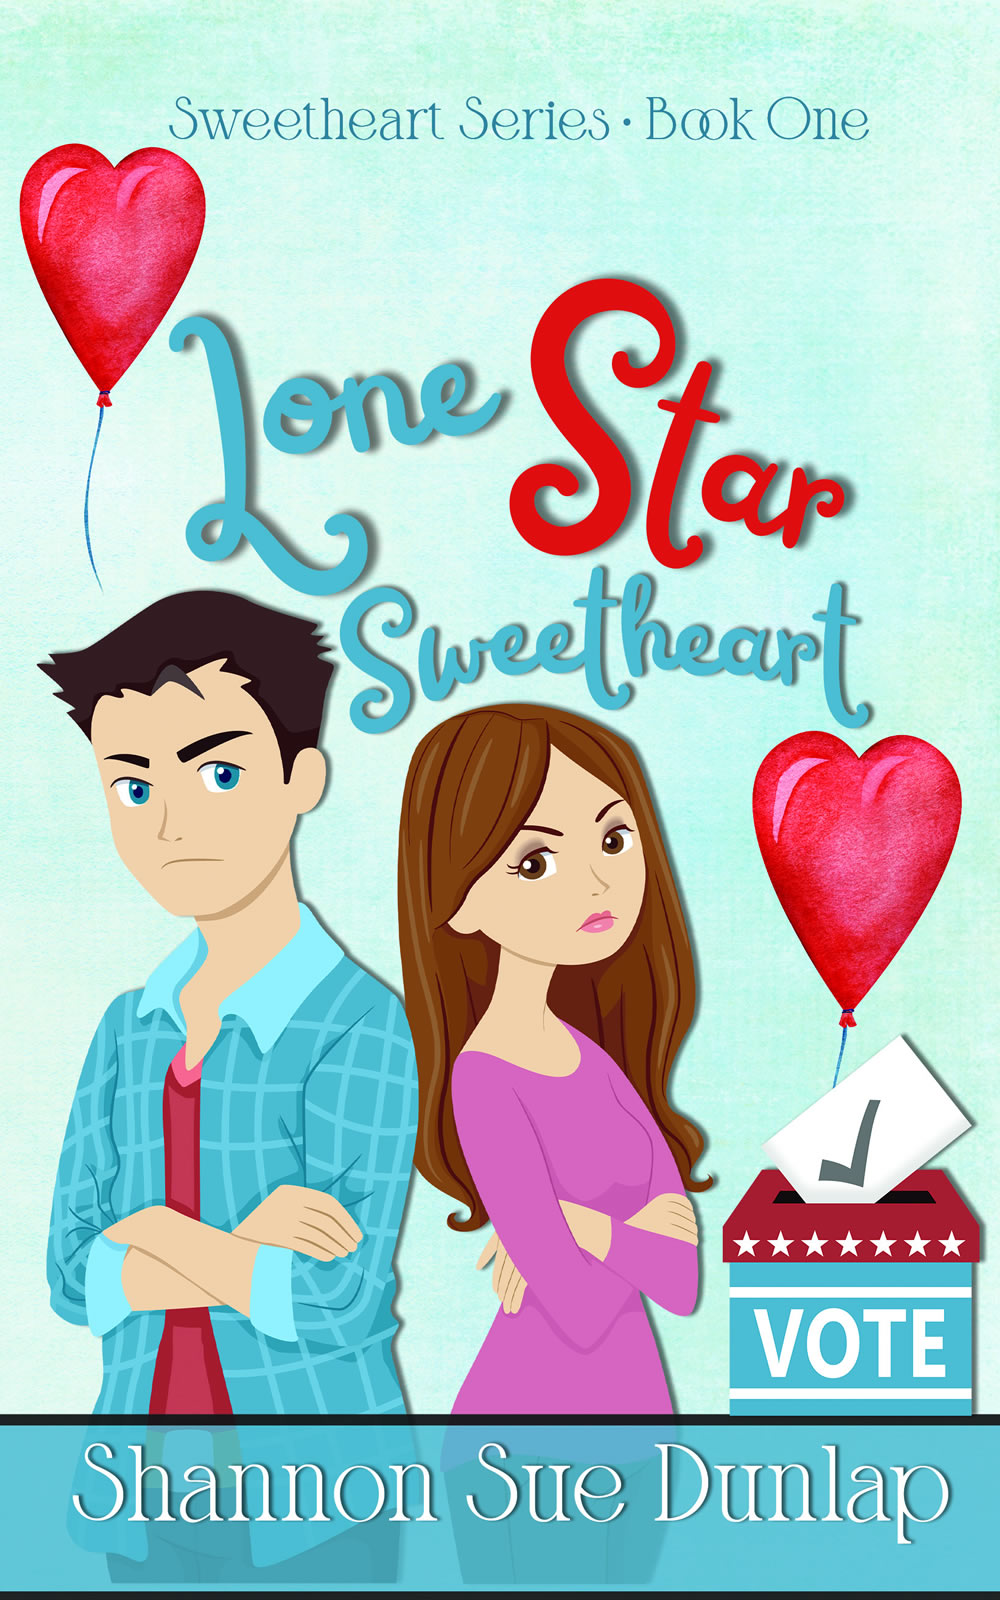 Lone Star Sweetheart by author Shannon Sue Dunlap